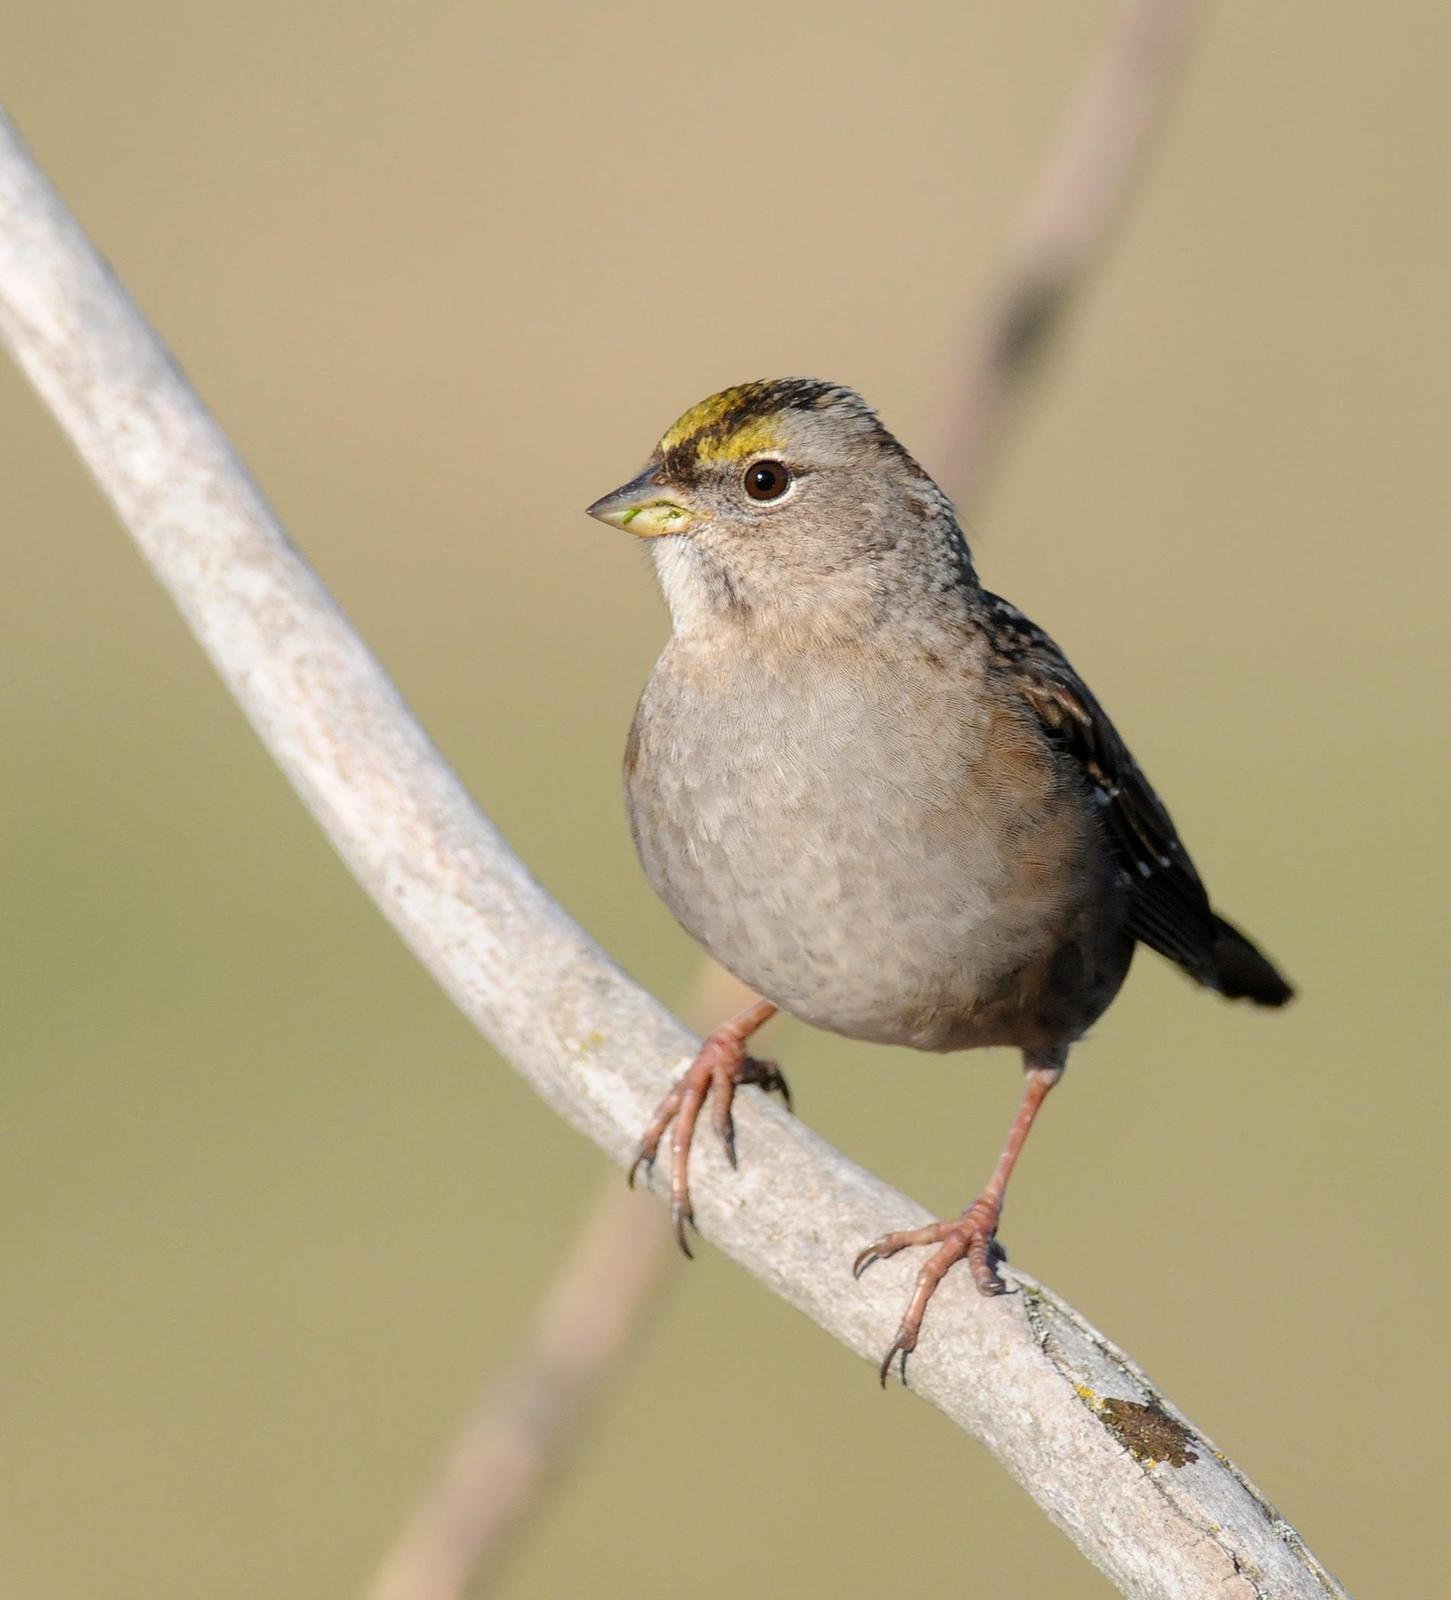 Golden-crowned Sparrow Photo by Steven Mlodinow